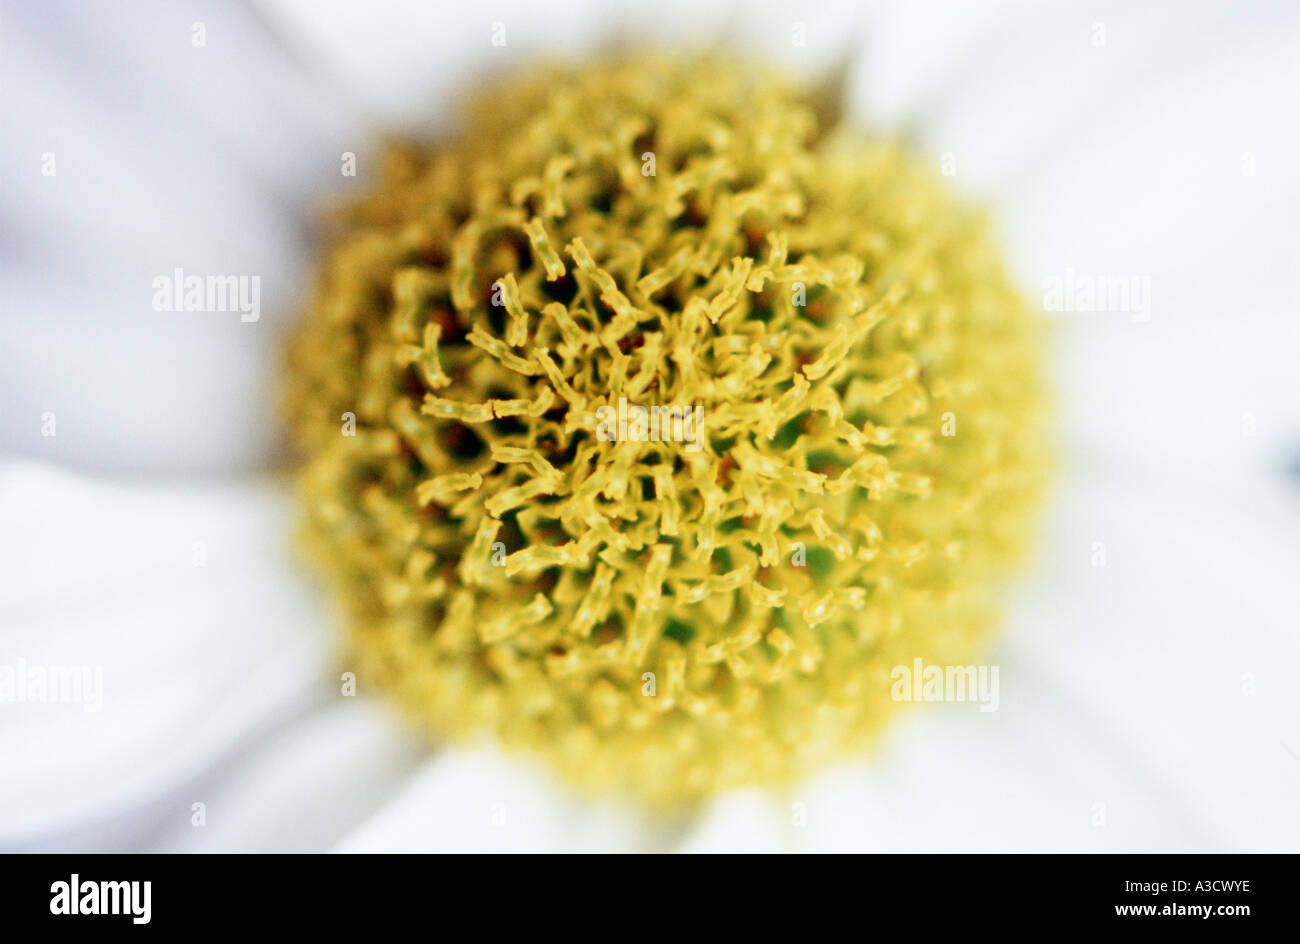 Leucanthemum x superbum previously known as chrysanthemum maximum shot with extremely shallow depth of field Stock Photo